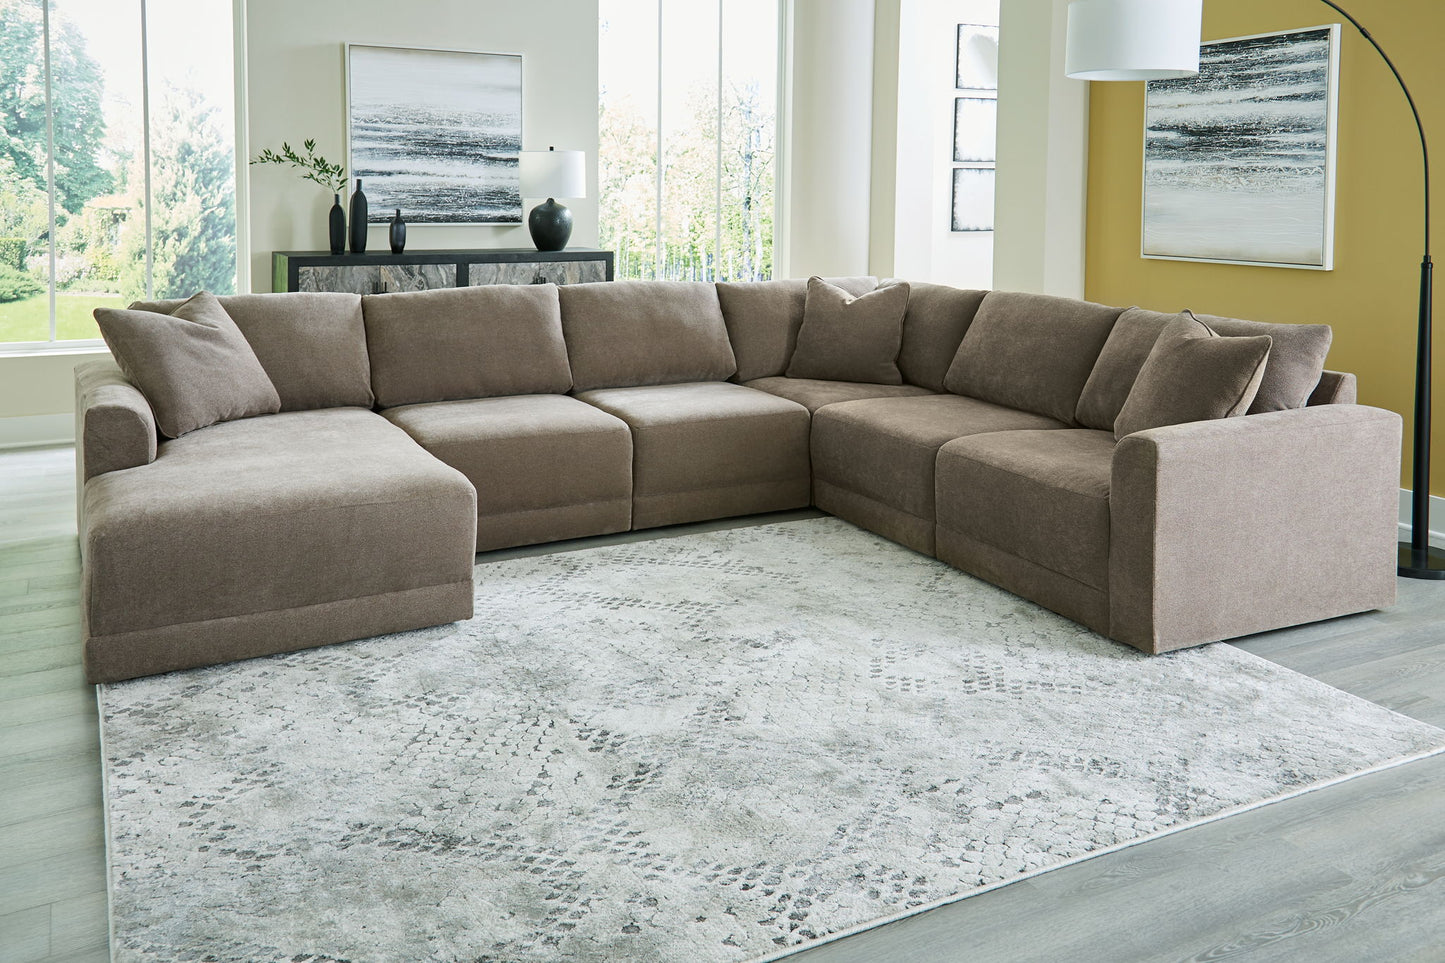 Raeanna - Storm - 6-Piece Sectional With Laf Corner Chaise